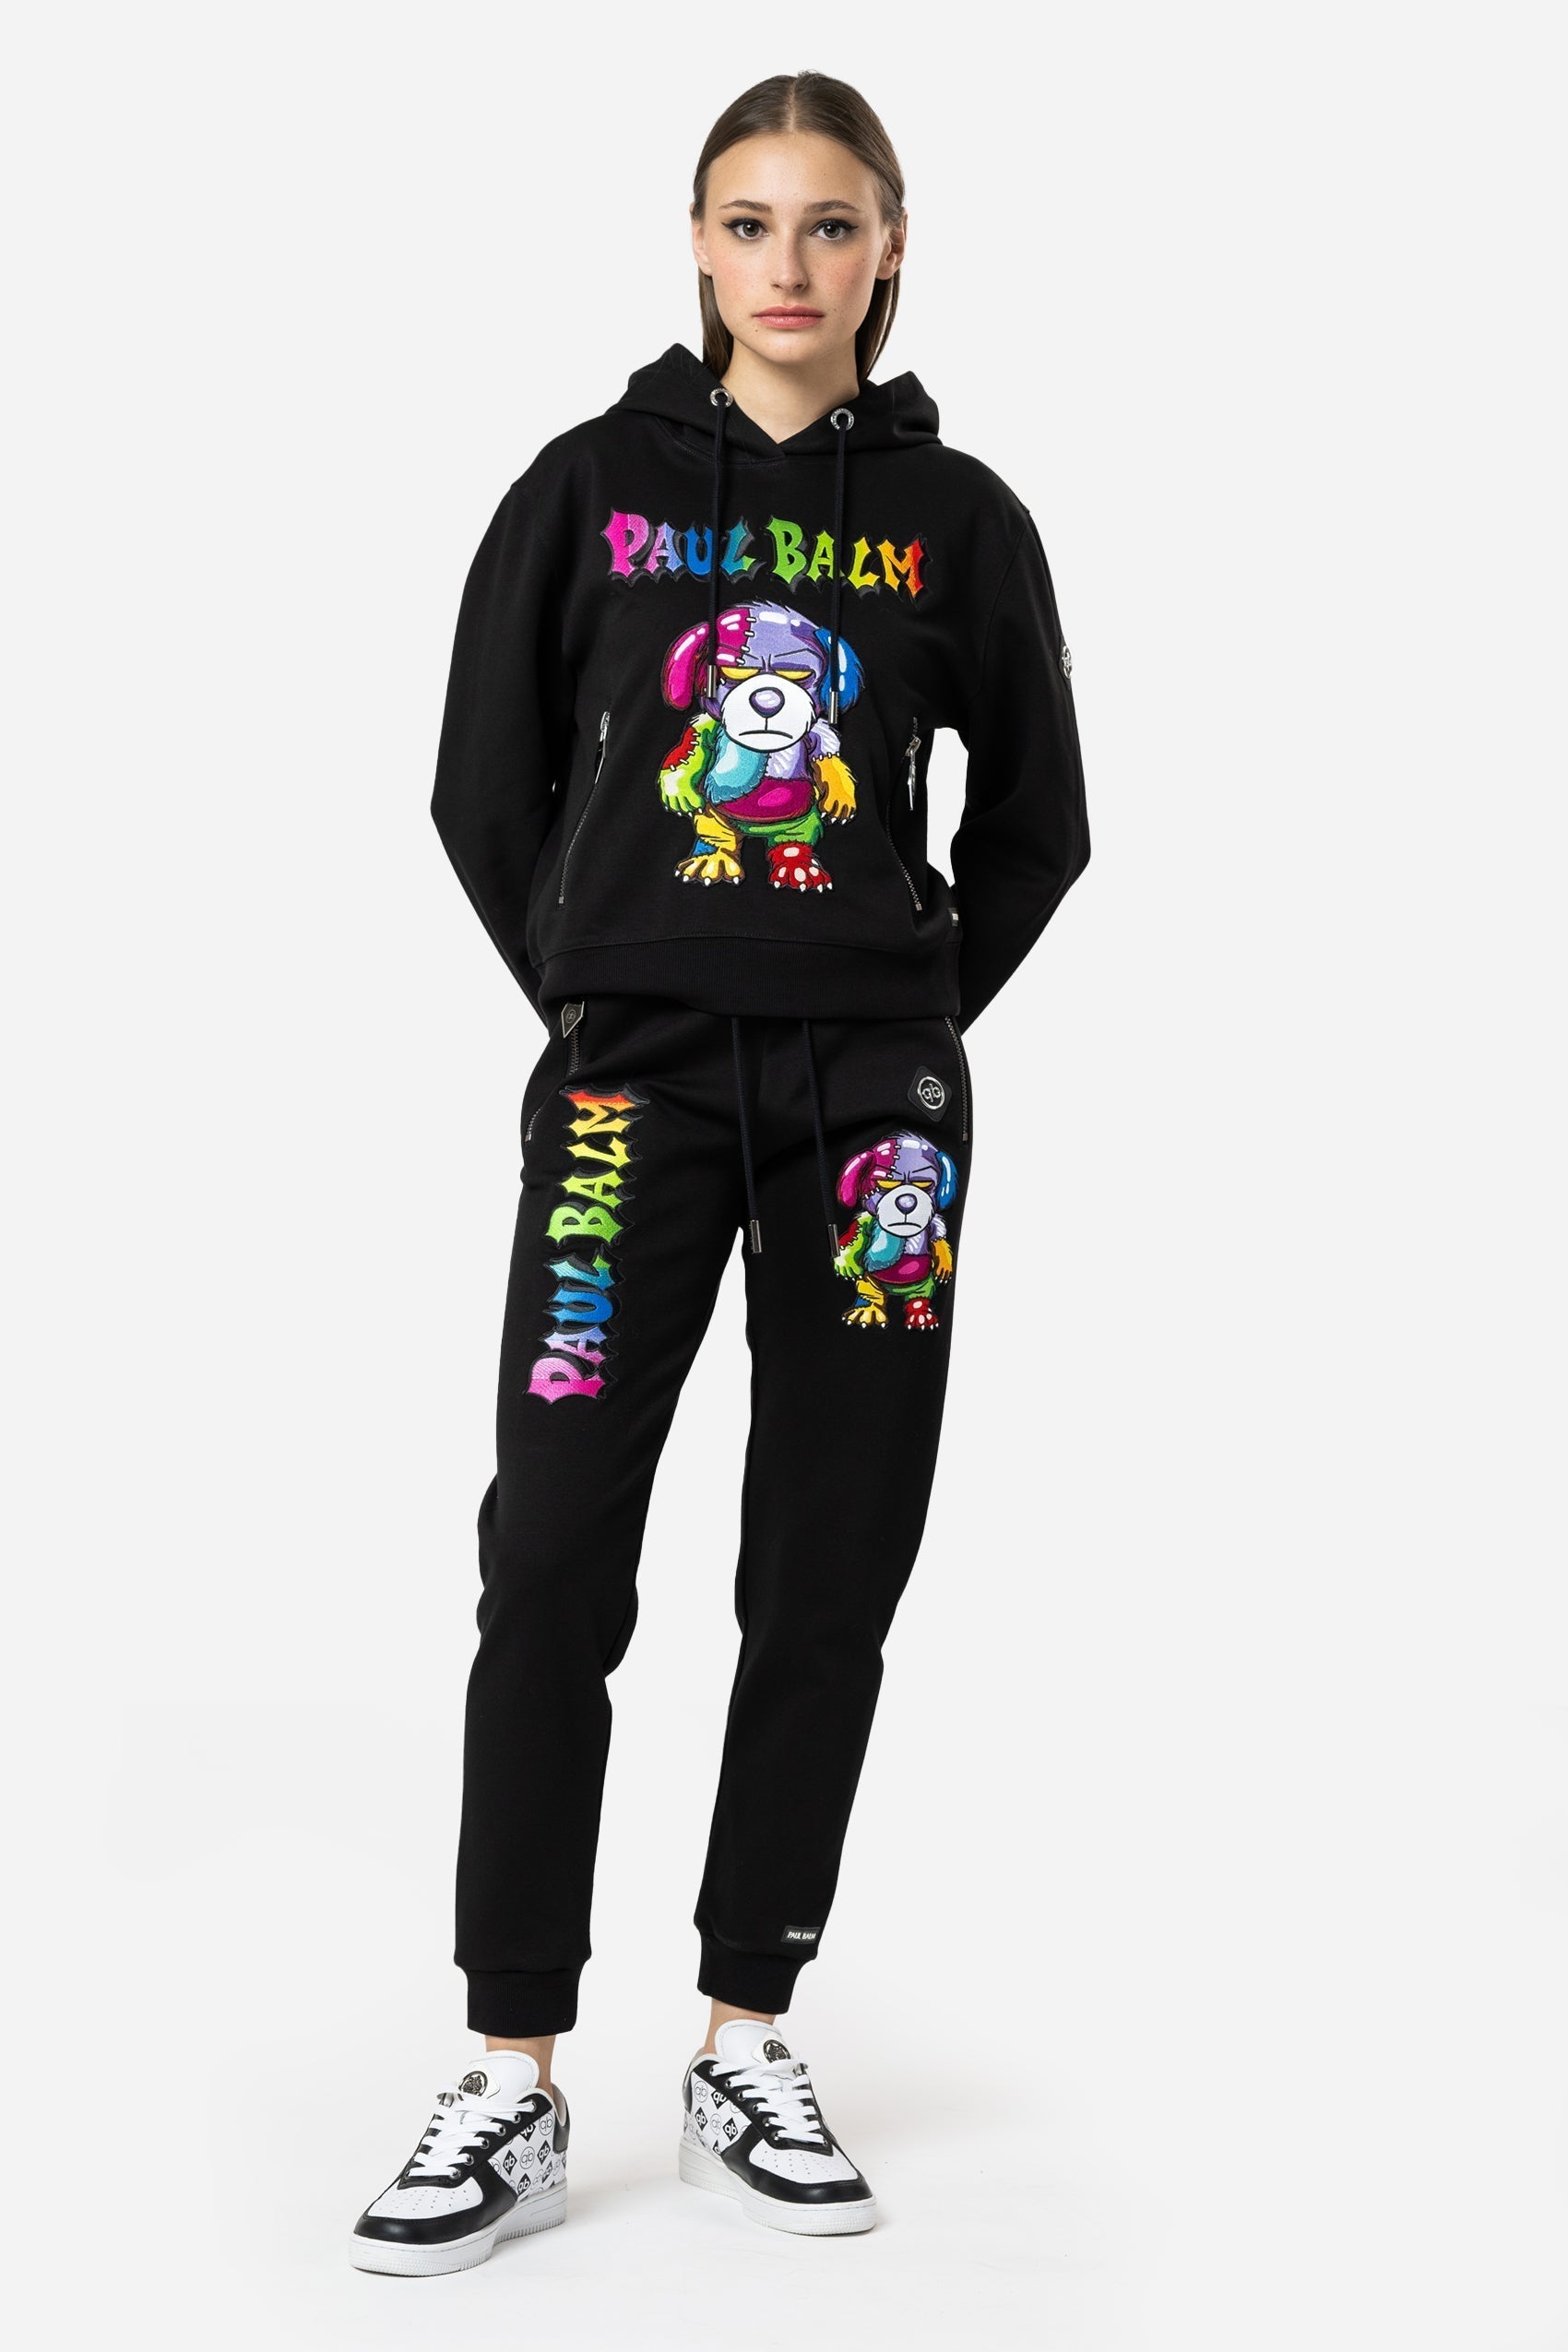 Embroidered Rainbow Teddy Pants - Limited to 300 - PAUL BALM WORLD